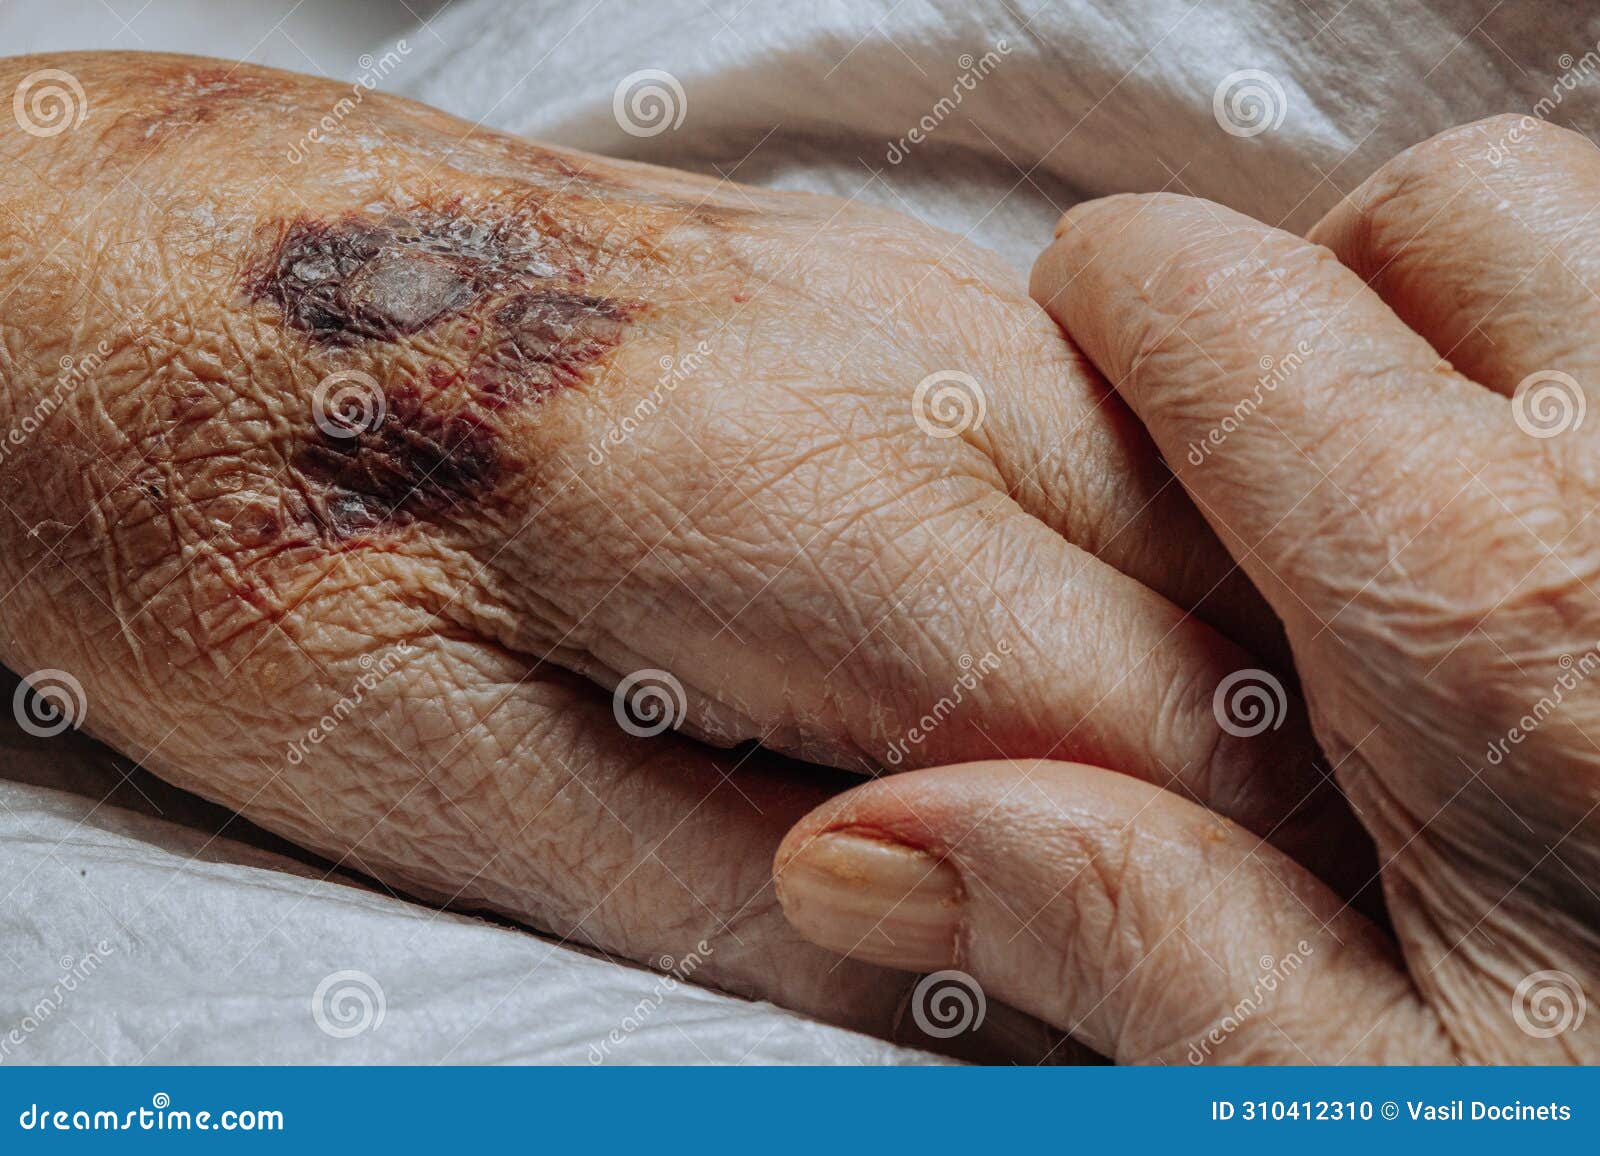 a bruise on the hand of an elderly person. known as senile purpura.